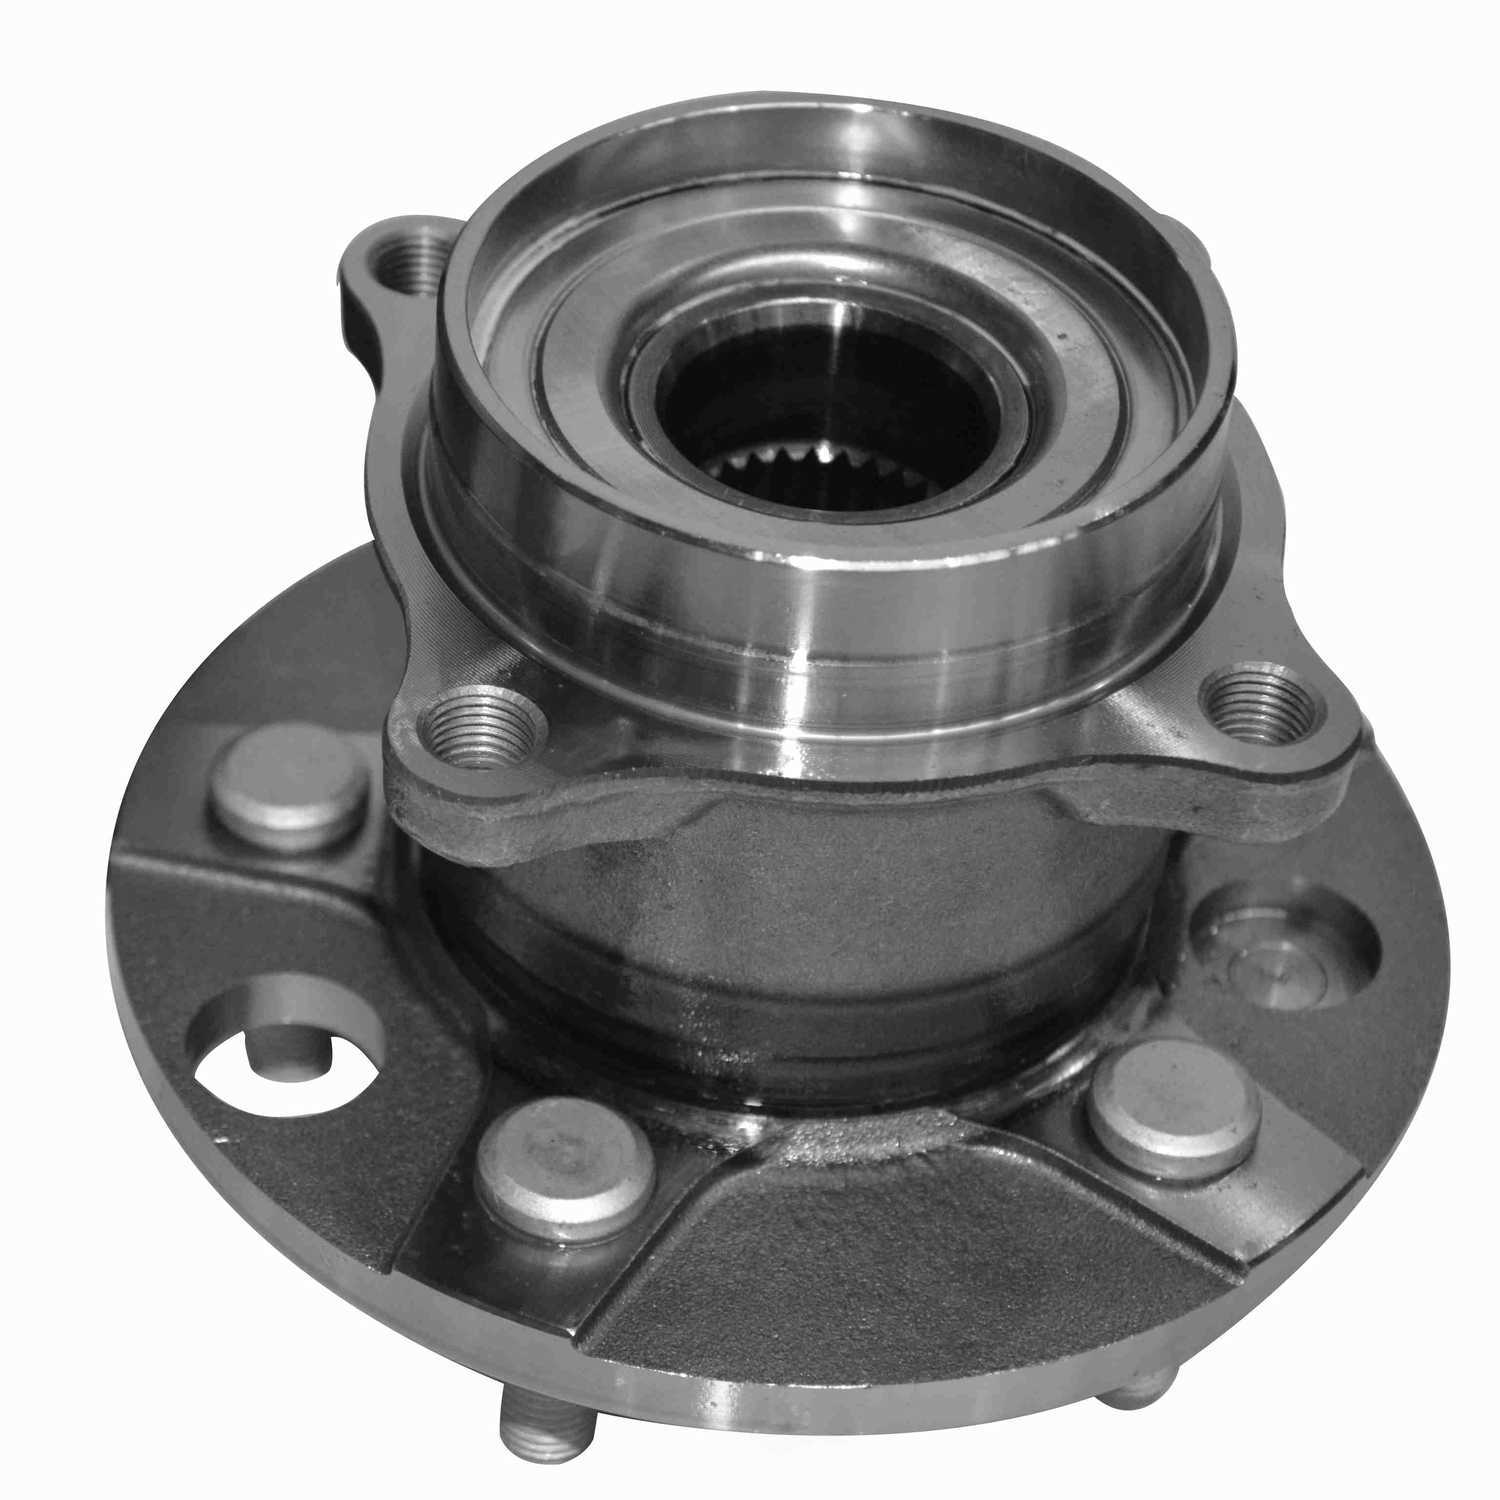 GSP NORTH AMERICA INC. - GSP New Wheel Bearing and Hub Assembly (Rear) - AD8 693205